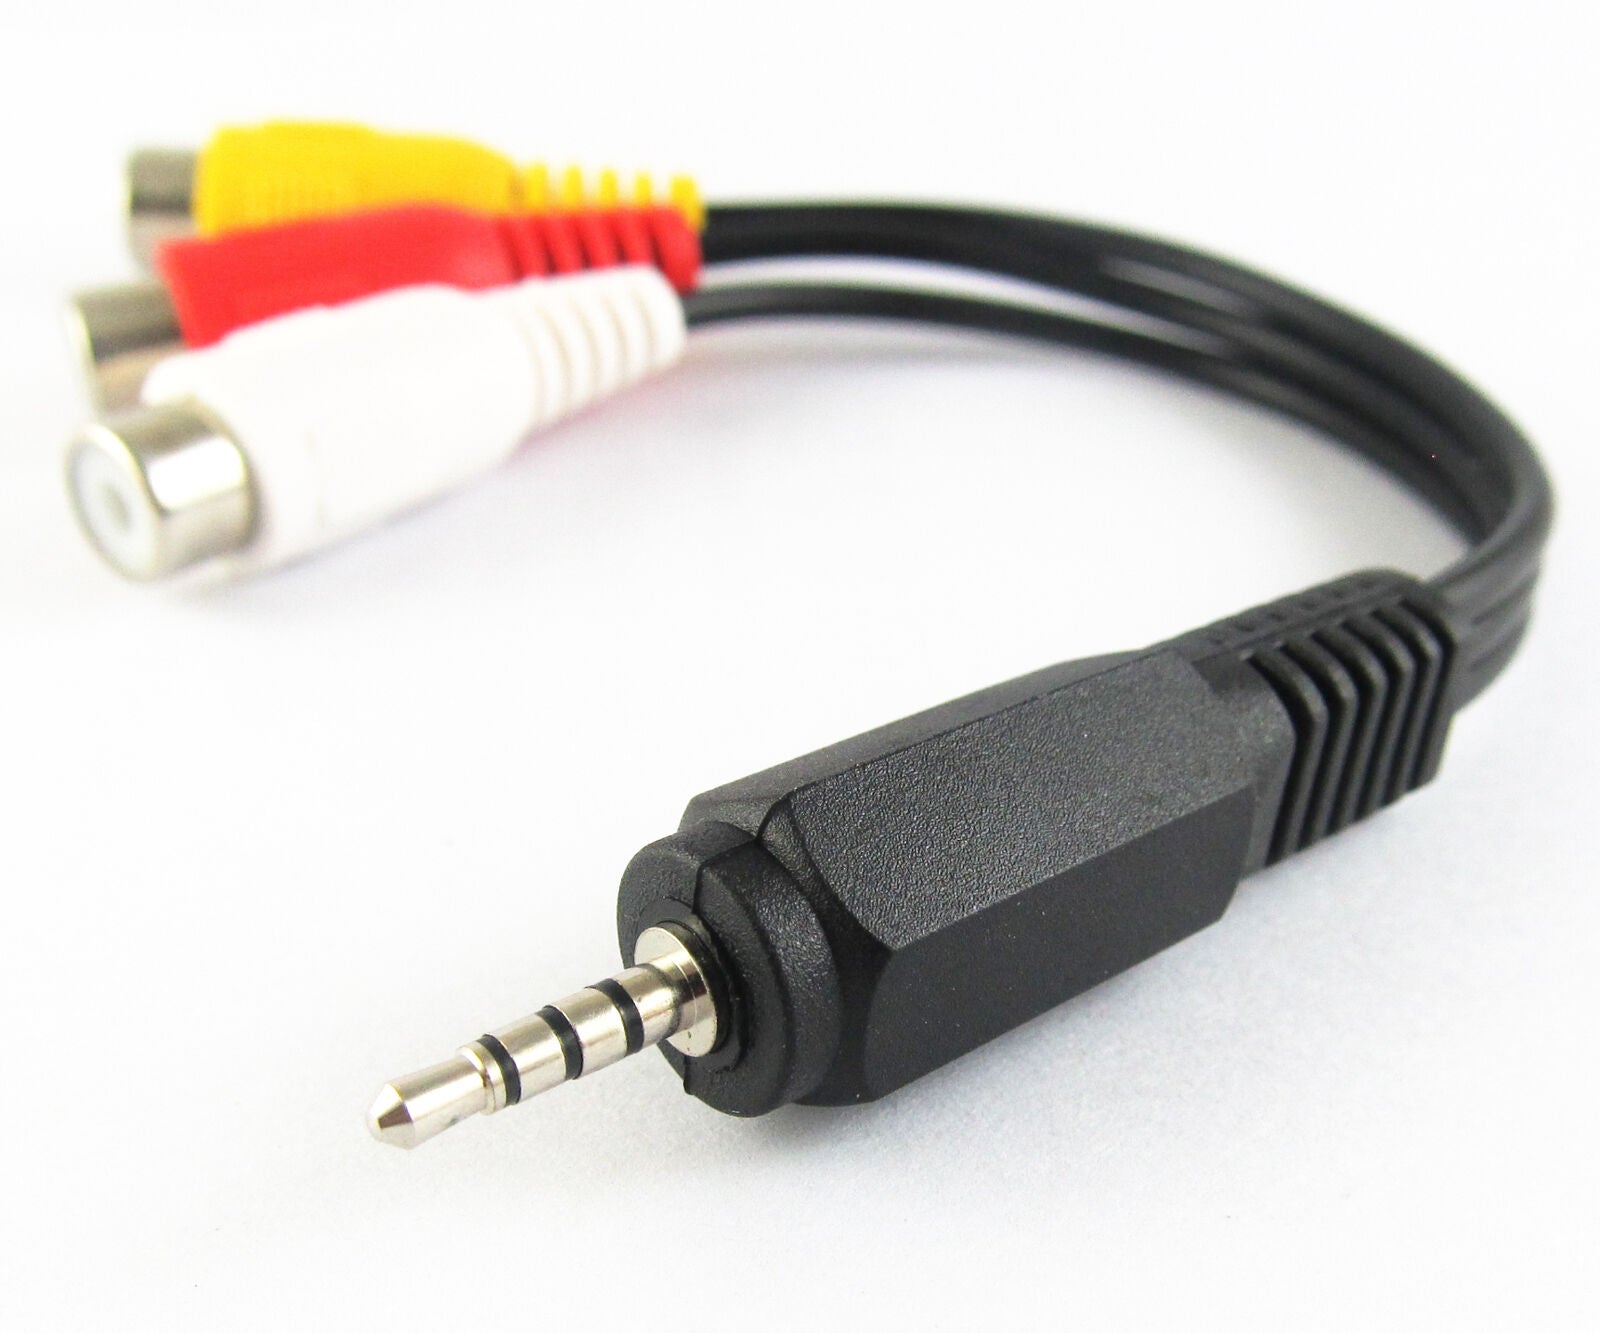 1pc 15cm Audio Video Joint Adapter Cable 2.5mm Male Plug to 3 RCA Jack Female